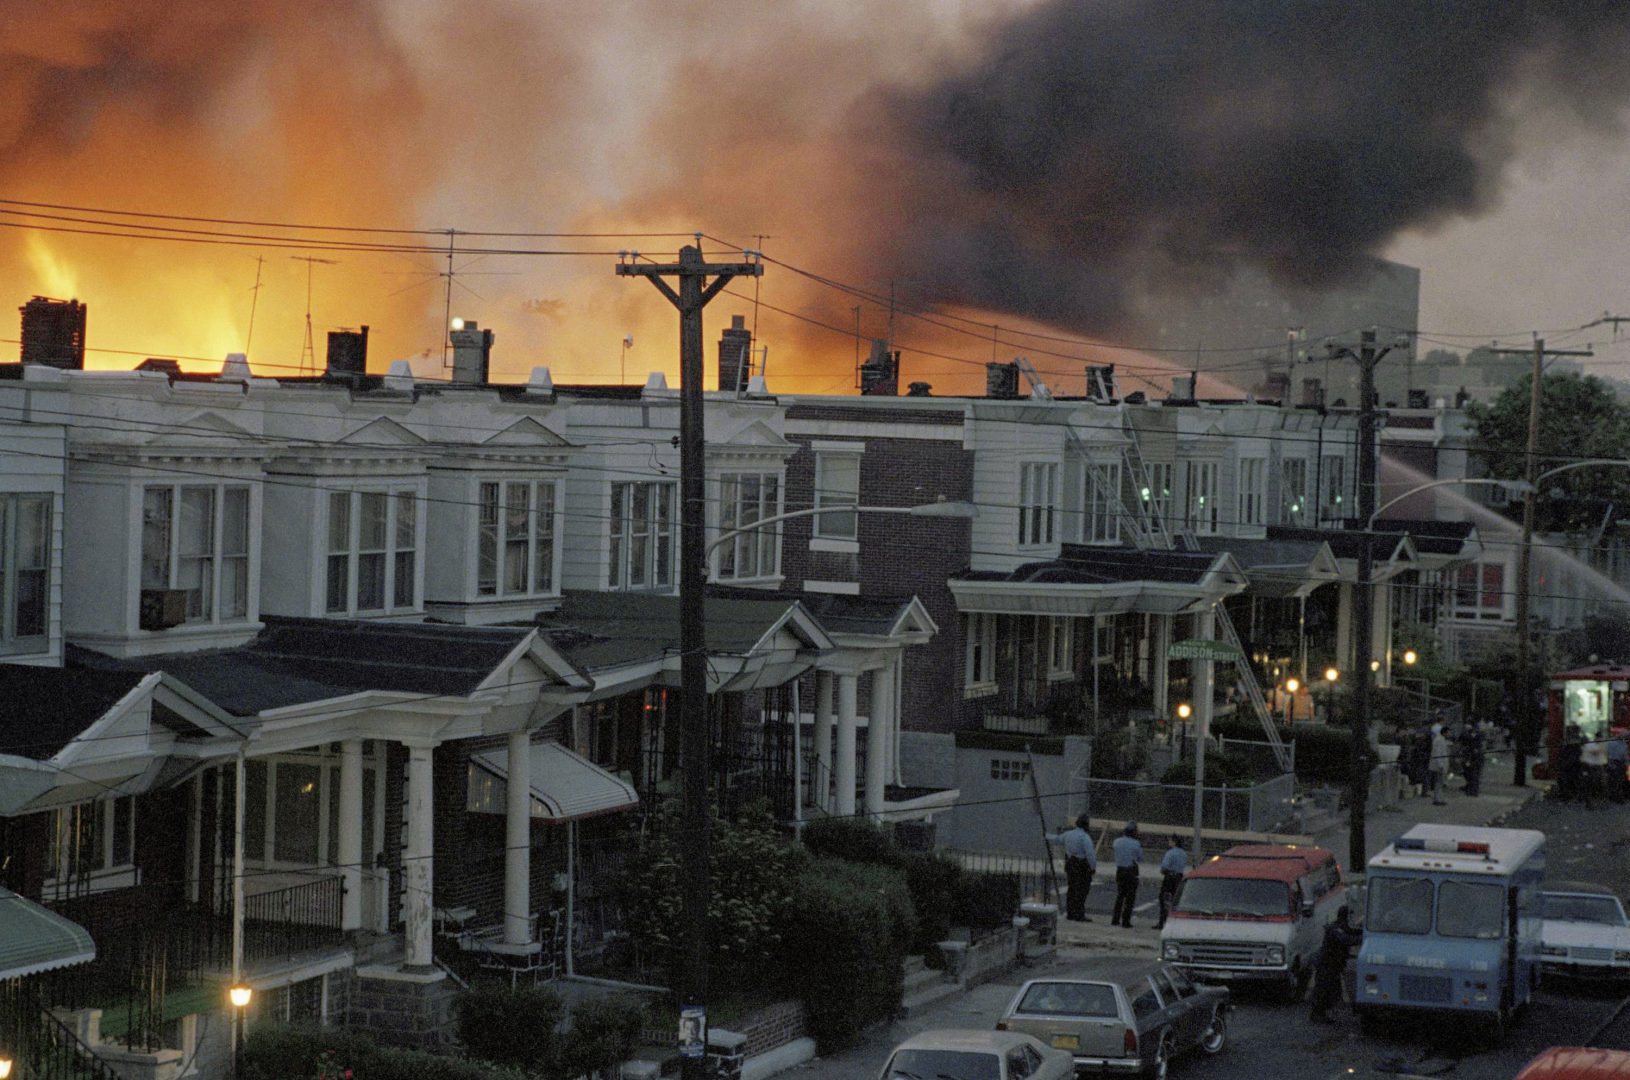 FILE - In this May, 1985 file photo, scores of row houses burn in a fire in the west Philadelphia neighborhood. Police dropped a bomb on the militant group MOVE's home on May 13, 1985 in an attempt to arrest members, leading to the burning of scores of homes in the neighborhood. A day after Philadelphia's health commissioner was forced to resign over the cremation of partial remains thought to belong to victims of a 1985 bombing of the headquarters of a Black organization, the city now says those victims' remains were never destroyed. City officials told the victims' family Friday, May 14, 2021 that a subordinate had disobeyed Health Commissioner Thomas Farley’s 2017 order to dispose of the remains. (AP Photo/File)